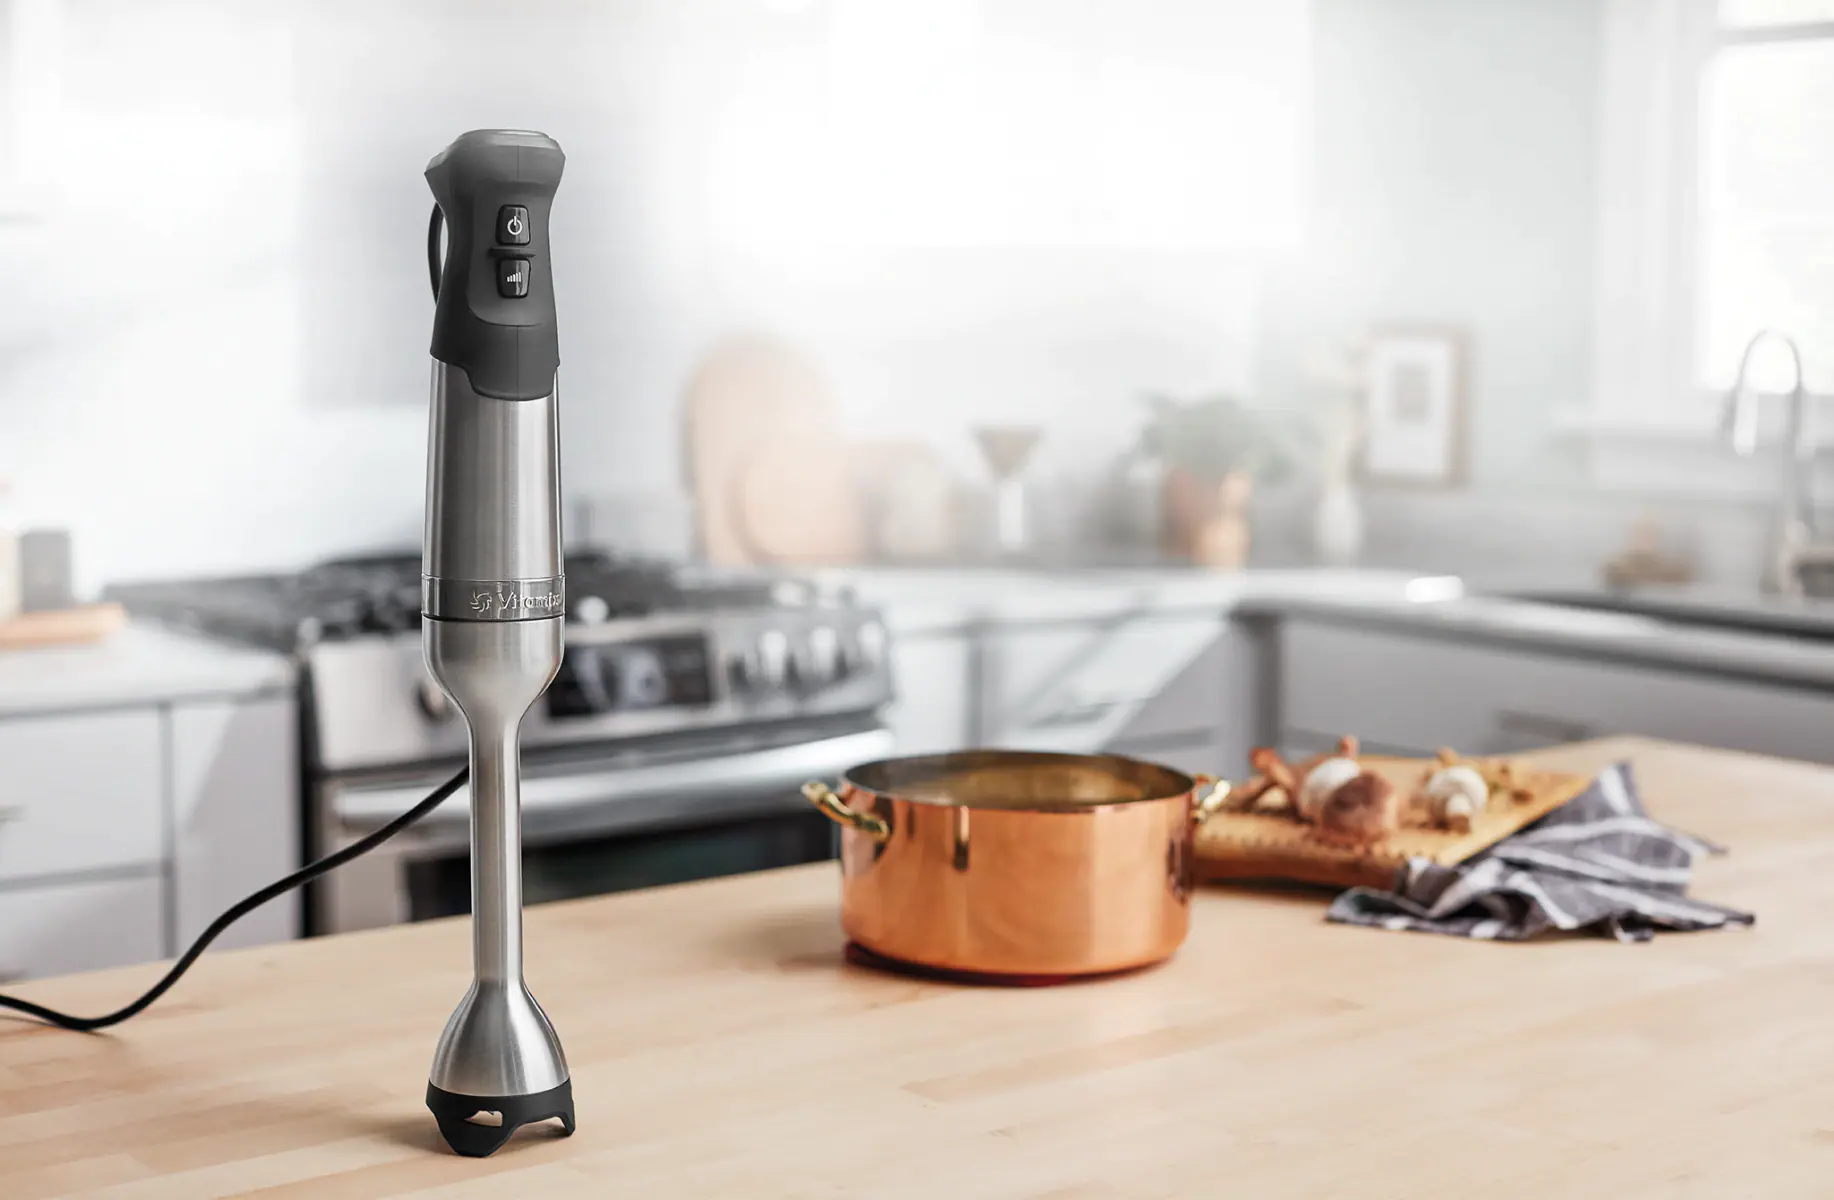 Ovente Electric Cordless Immersion Hand Blender 200 Watt 8-Mixing